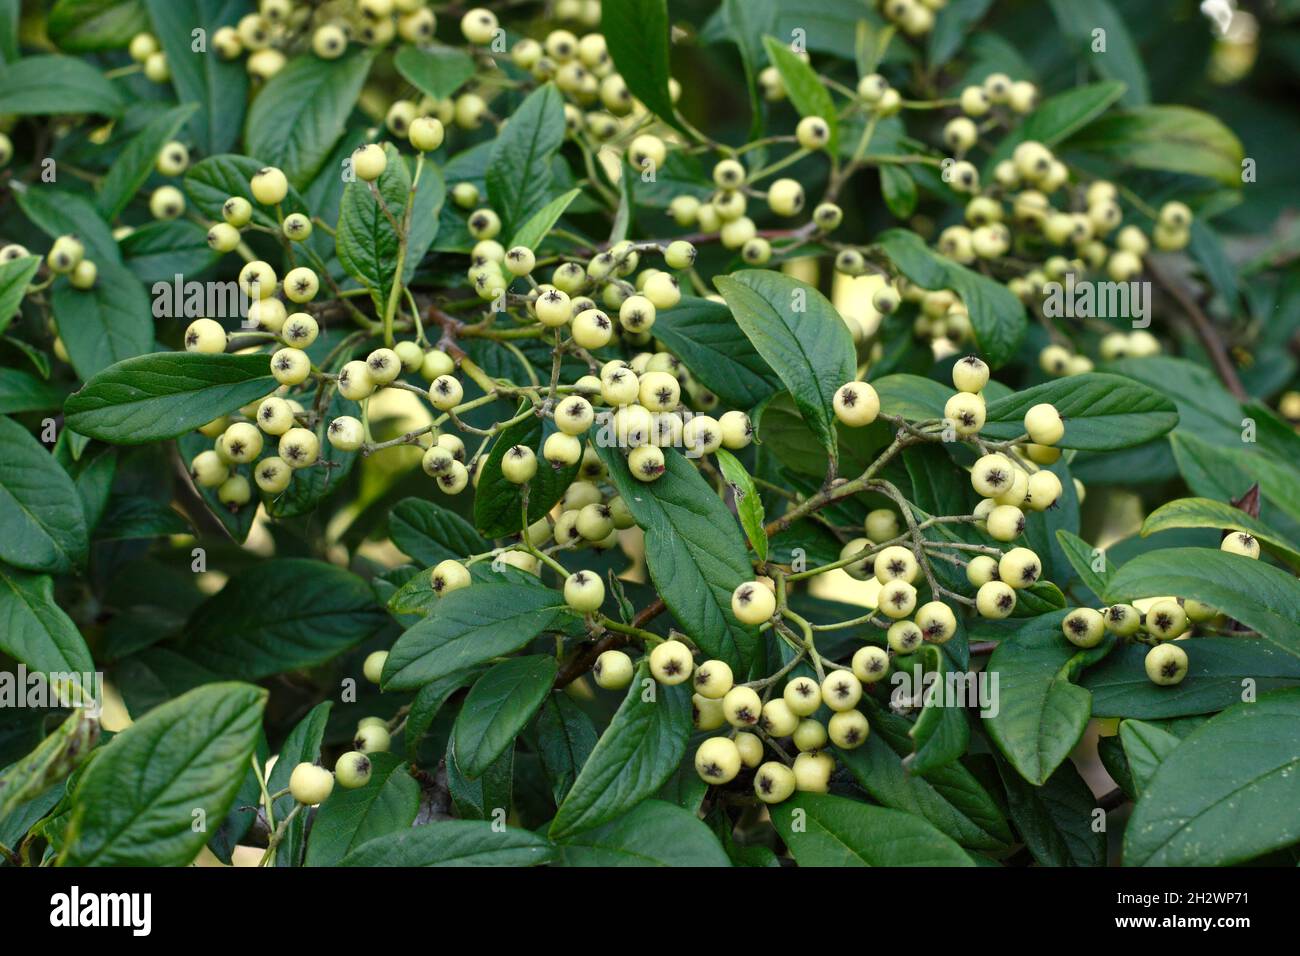 Cotoneaster Rothschildianus. Cotoneaster Tree displaying clusters of creamy yelllow berries in autumn. UK Stock Photo